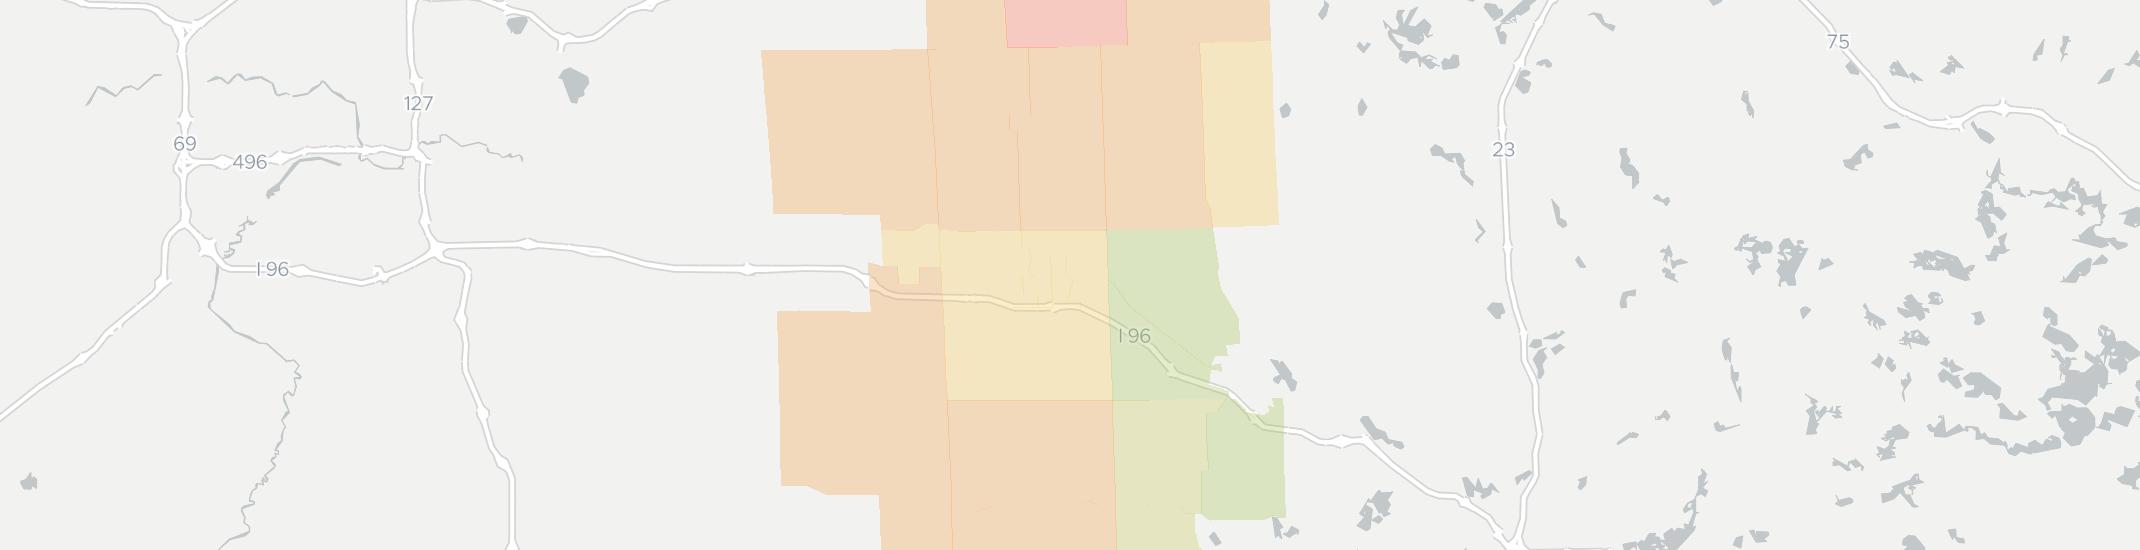 Fowlerville Internet Competition Map. Click for interactive map